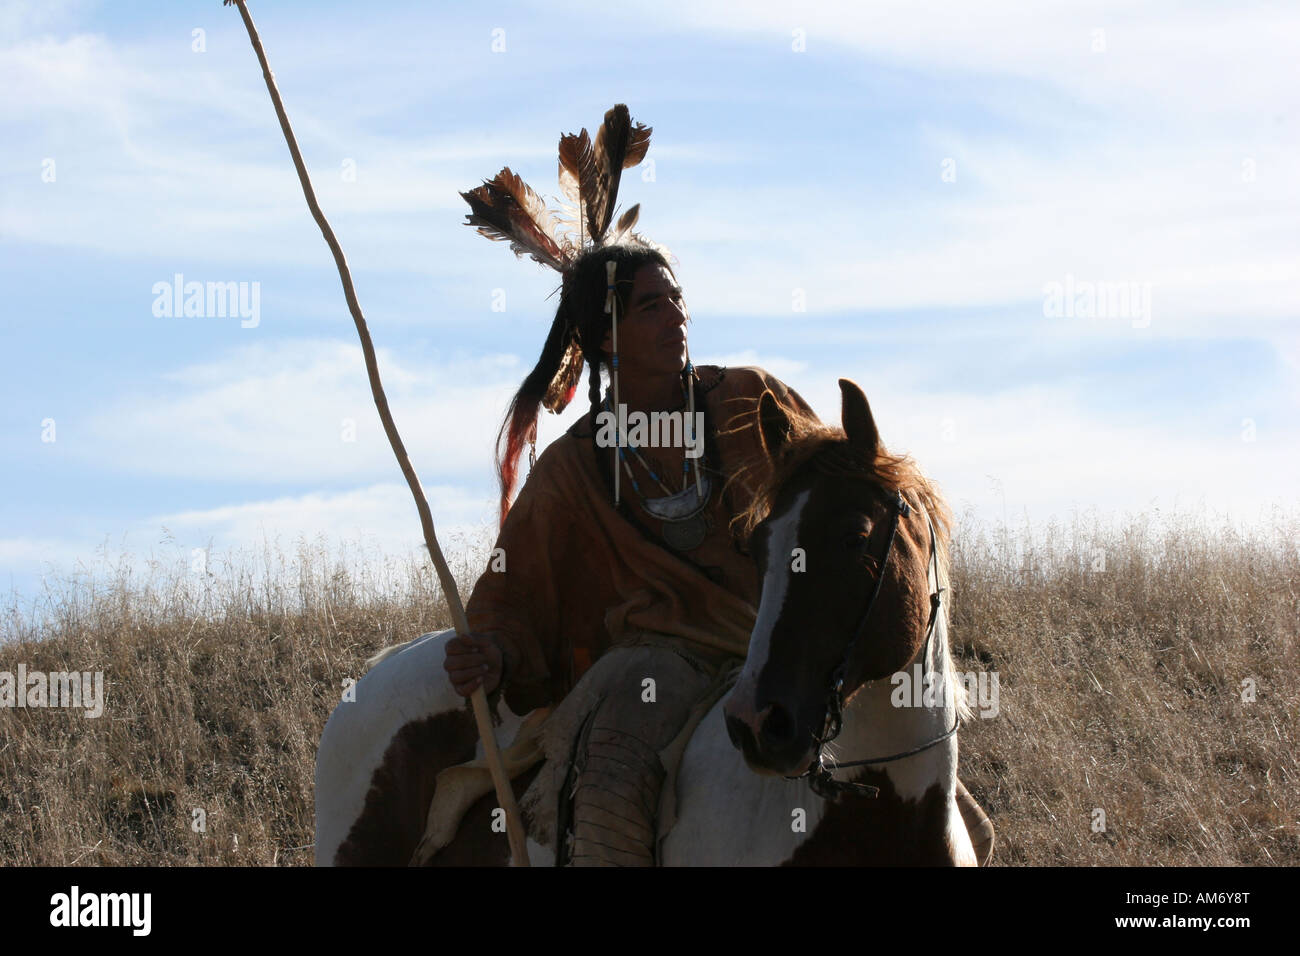 A Native American Indian man siting bareback on a horse riding the ...